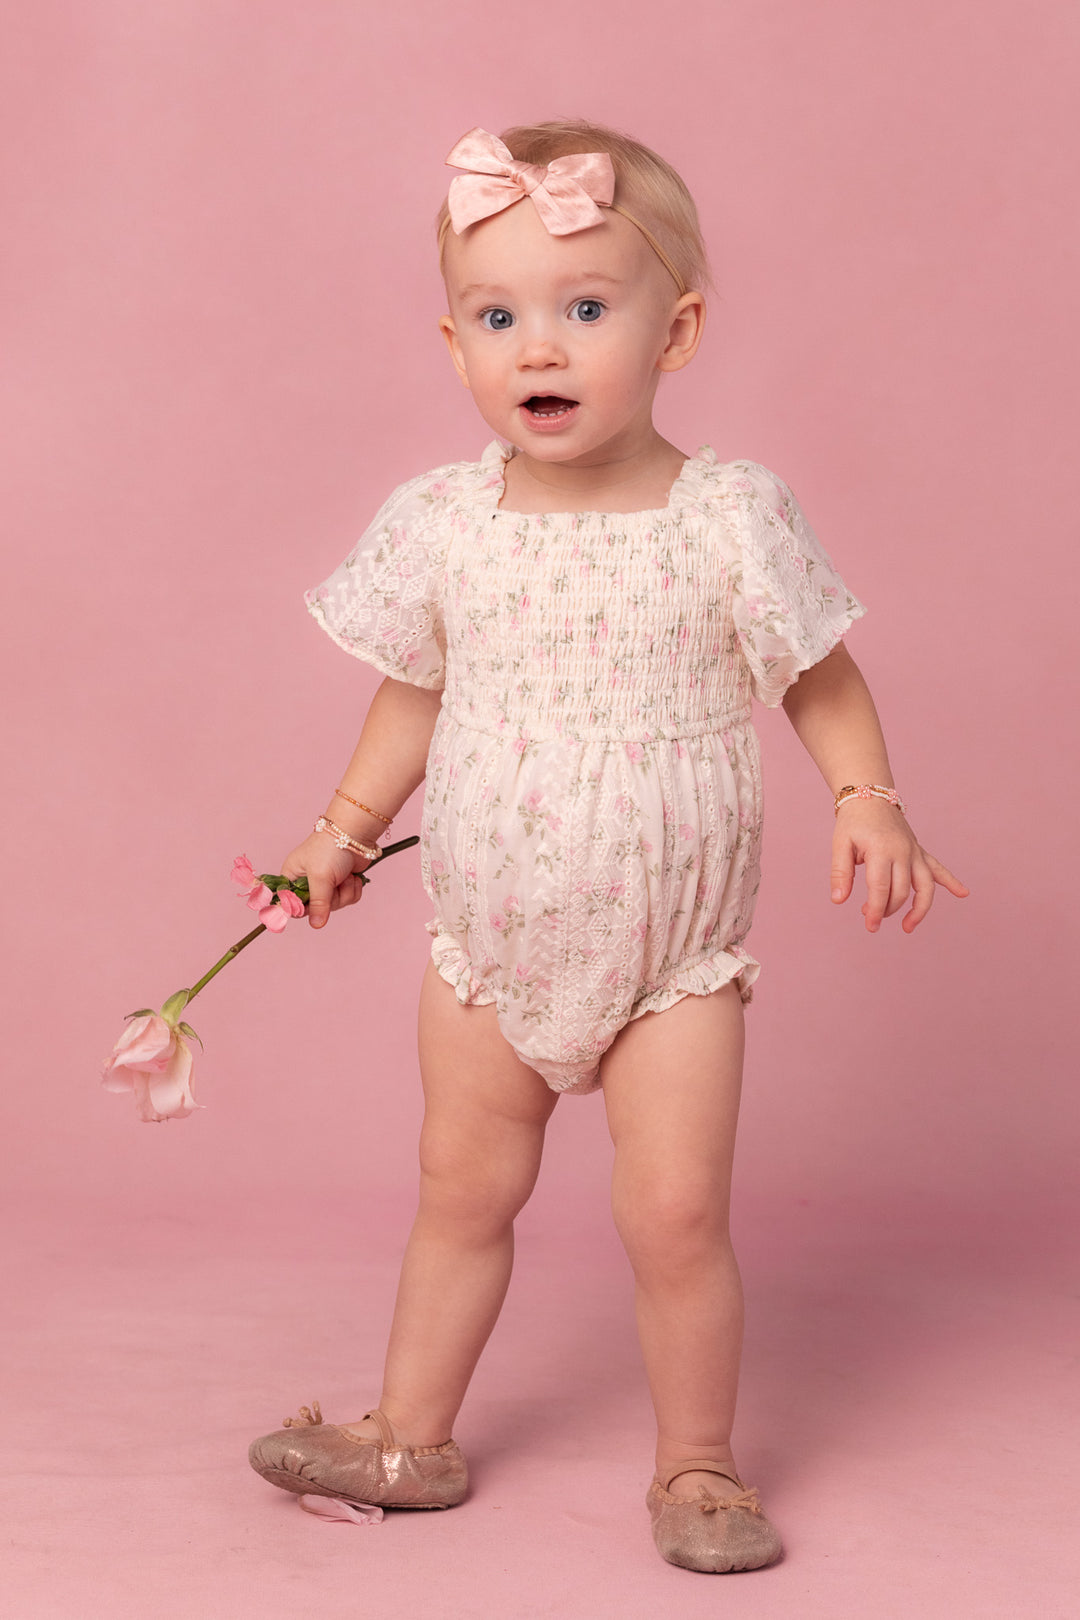 Baby Madison Romper in Eyelet Floral